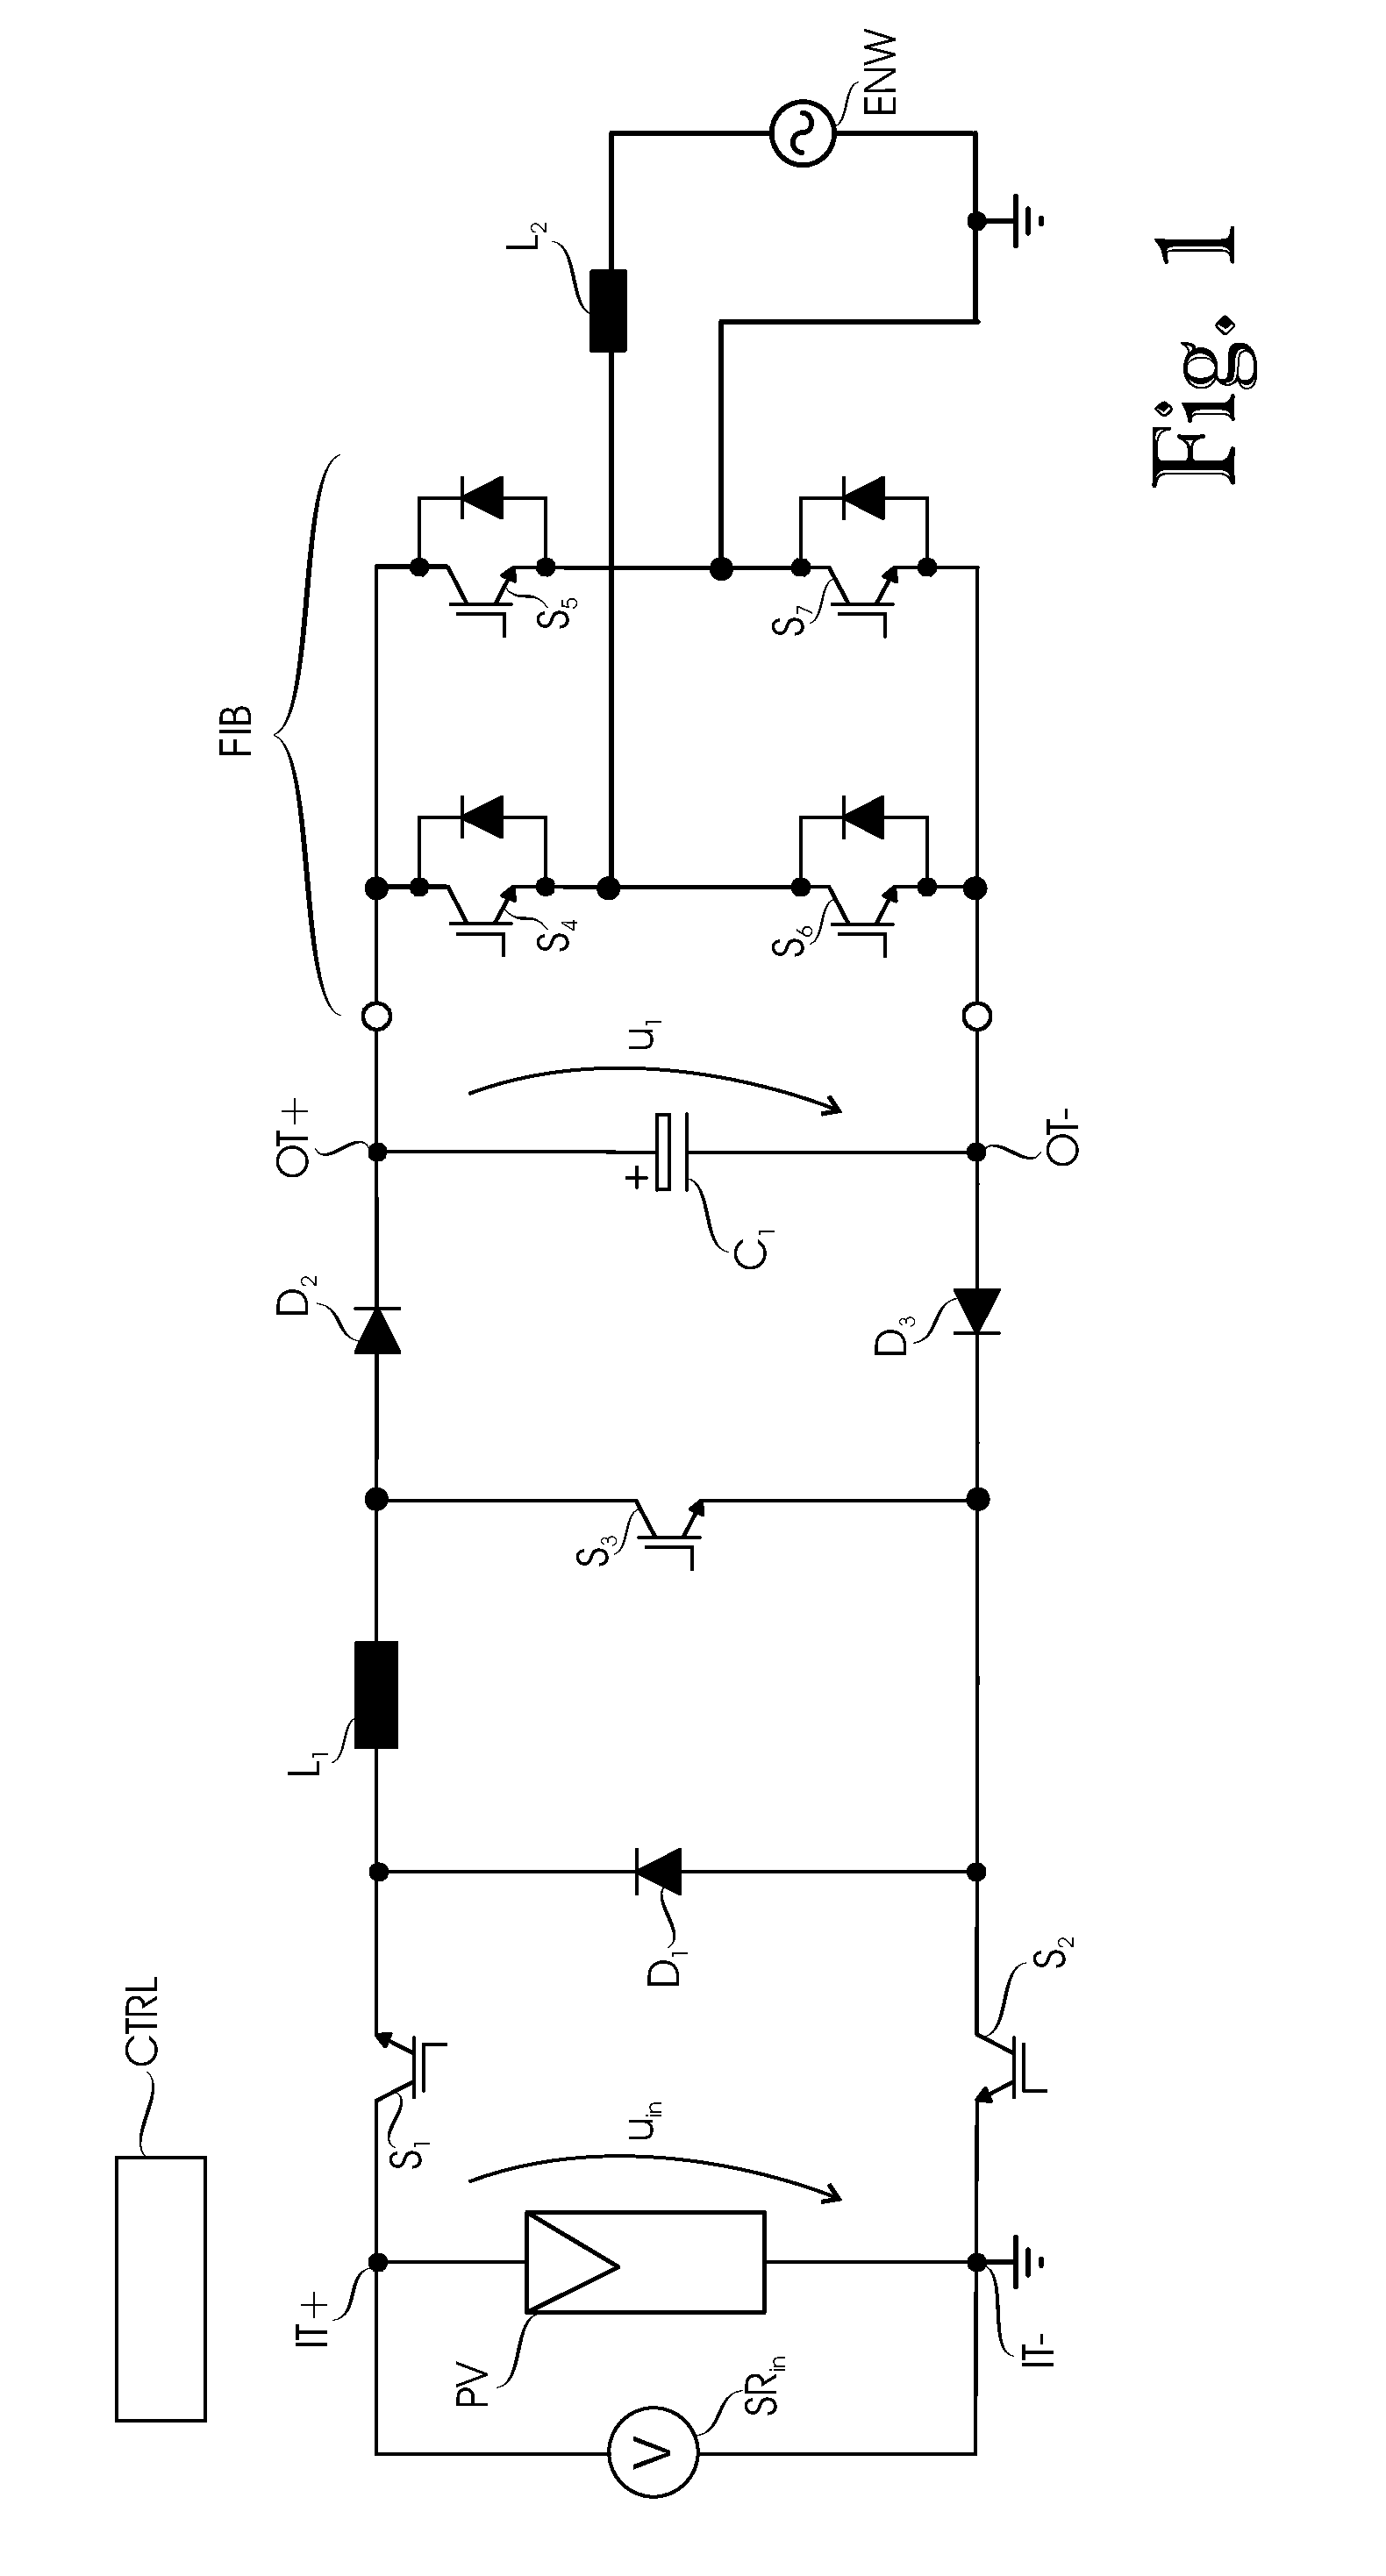 Non-isolated dc-dc converter for solar power plant